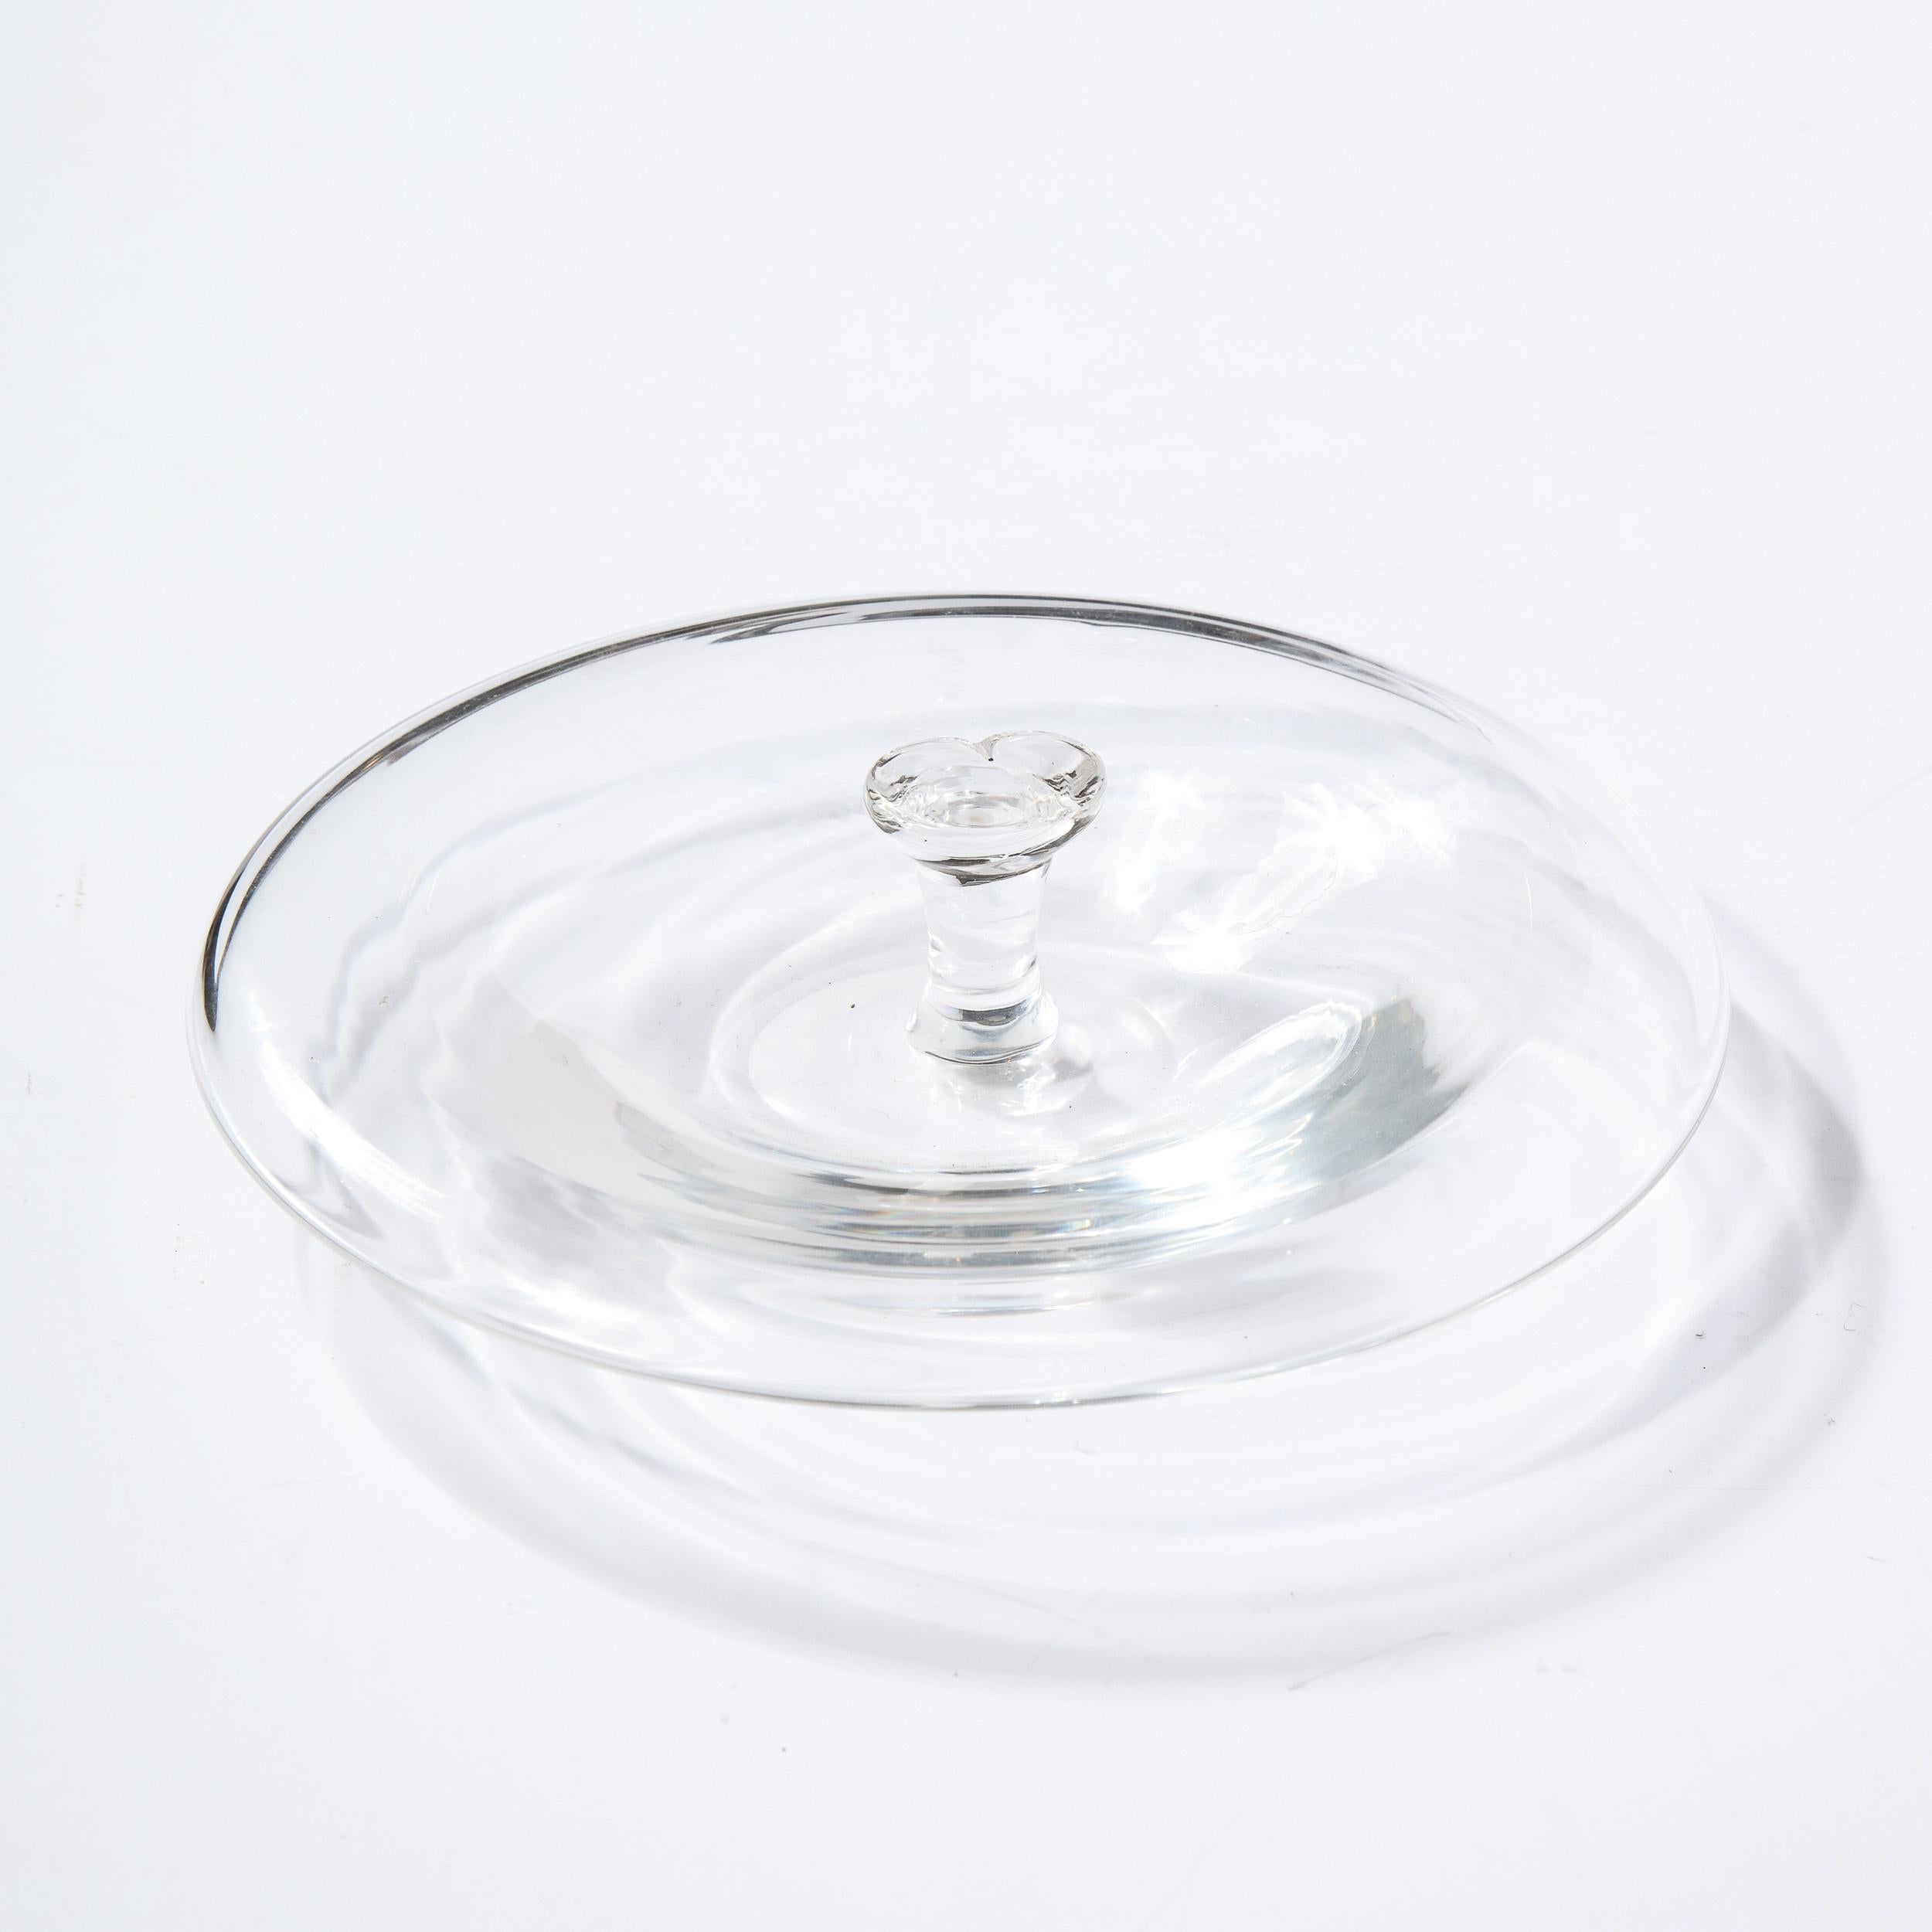 Mid-Century Modern Translucent Glass Decorative Dish by Elsa Peretti for Tiffany For Sale 1